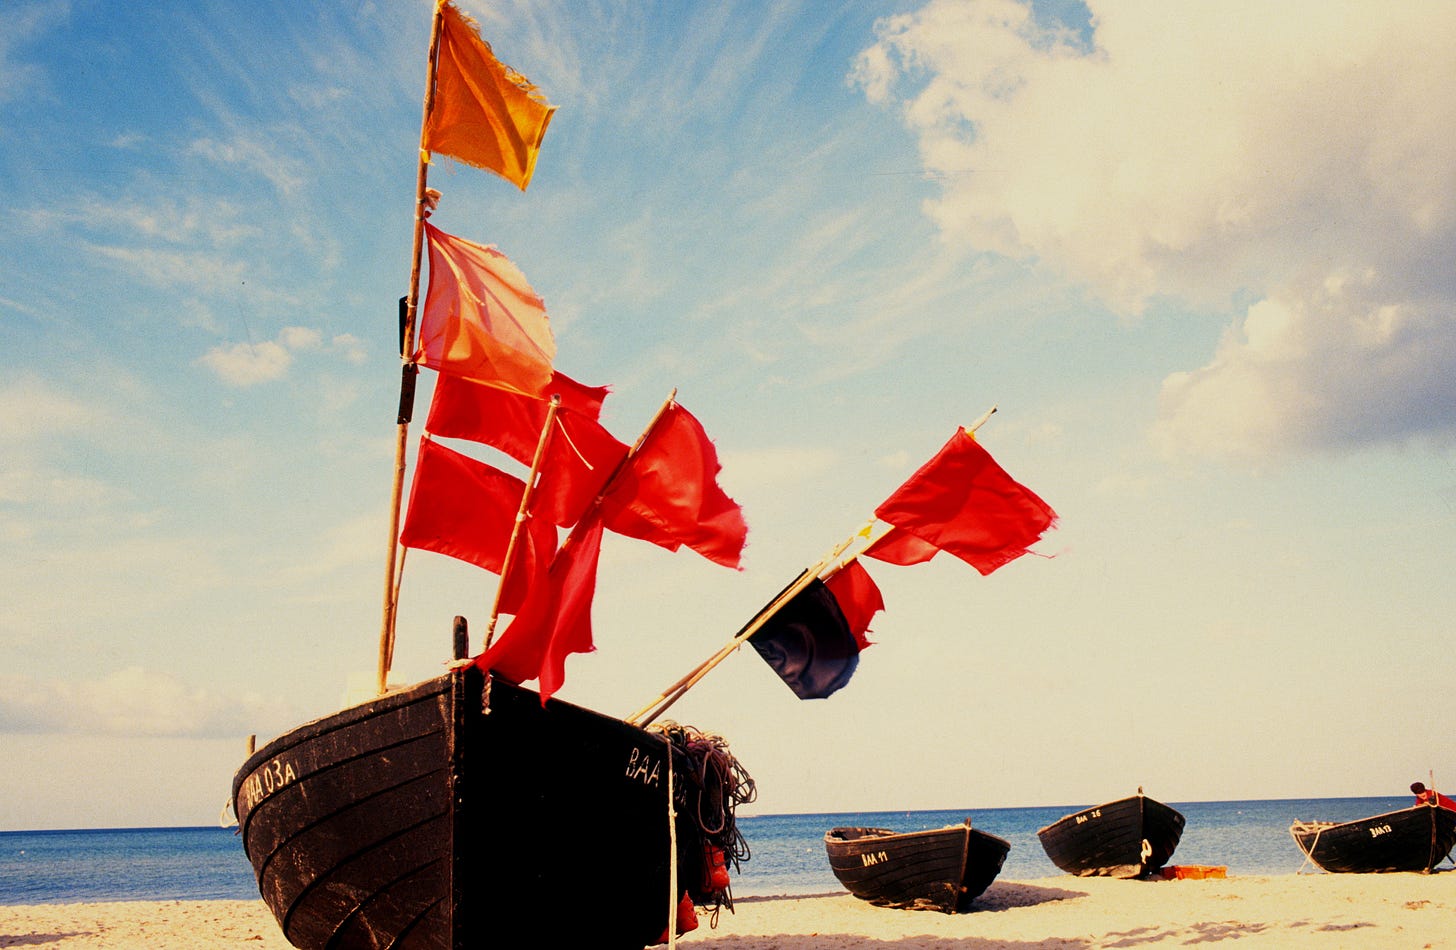 Boat on beach with red flags